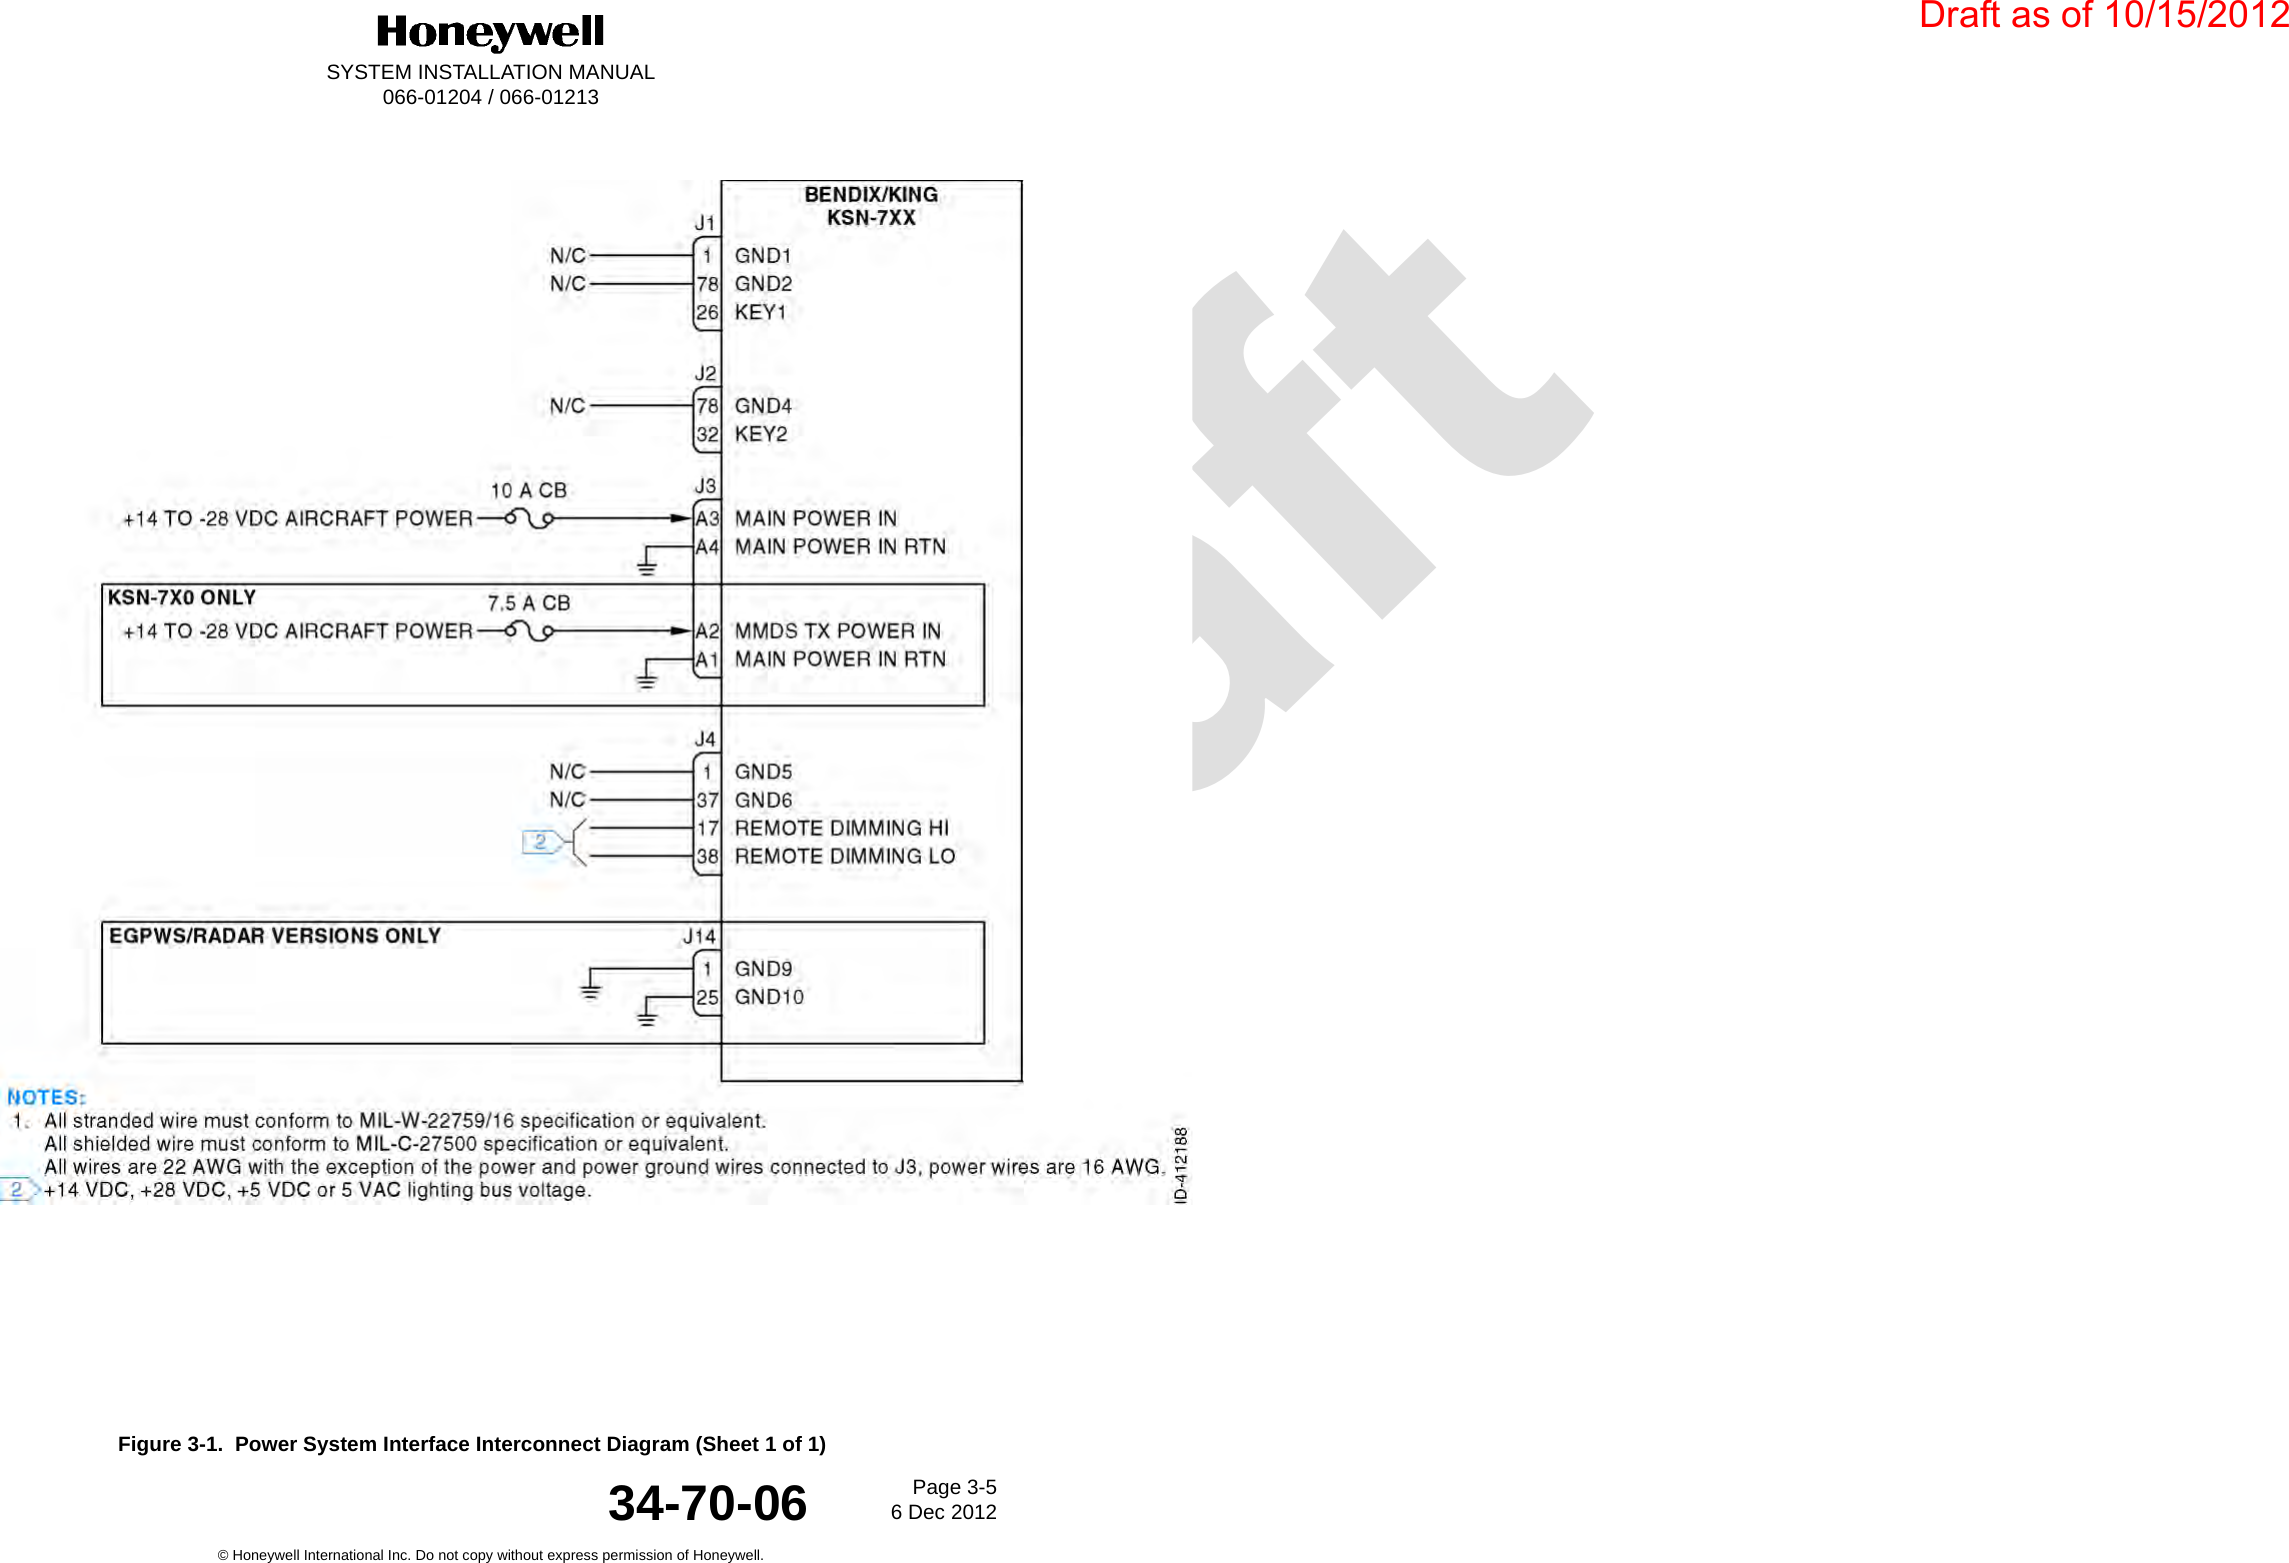 DraftSYSTEM INSTALLATION MANUAL066-01204 / 066-01213Page 3-56 Dec 2012© Honeywell International Inc. Do not copy without express permission of Honeywell.34-70-06Figure 3-1.  Power System Interface Interconnect Diagram (Sheet 1 of 1)Draft as of 10/15/2012